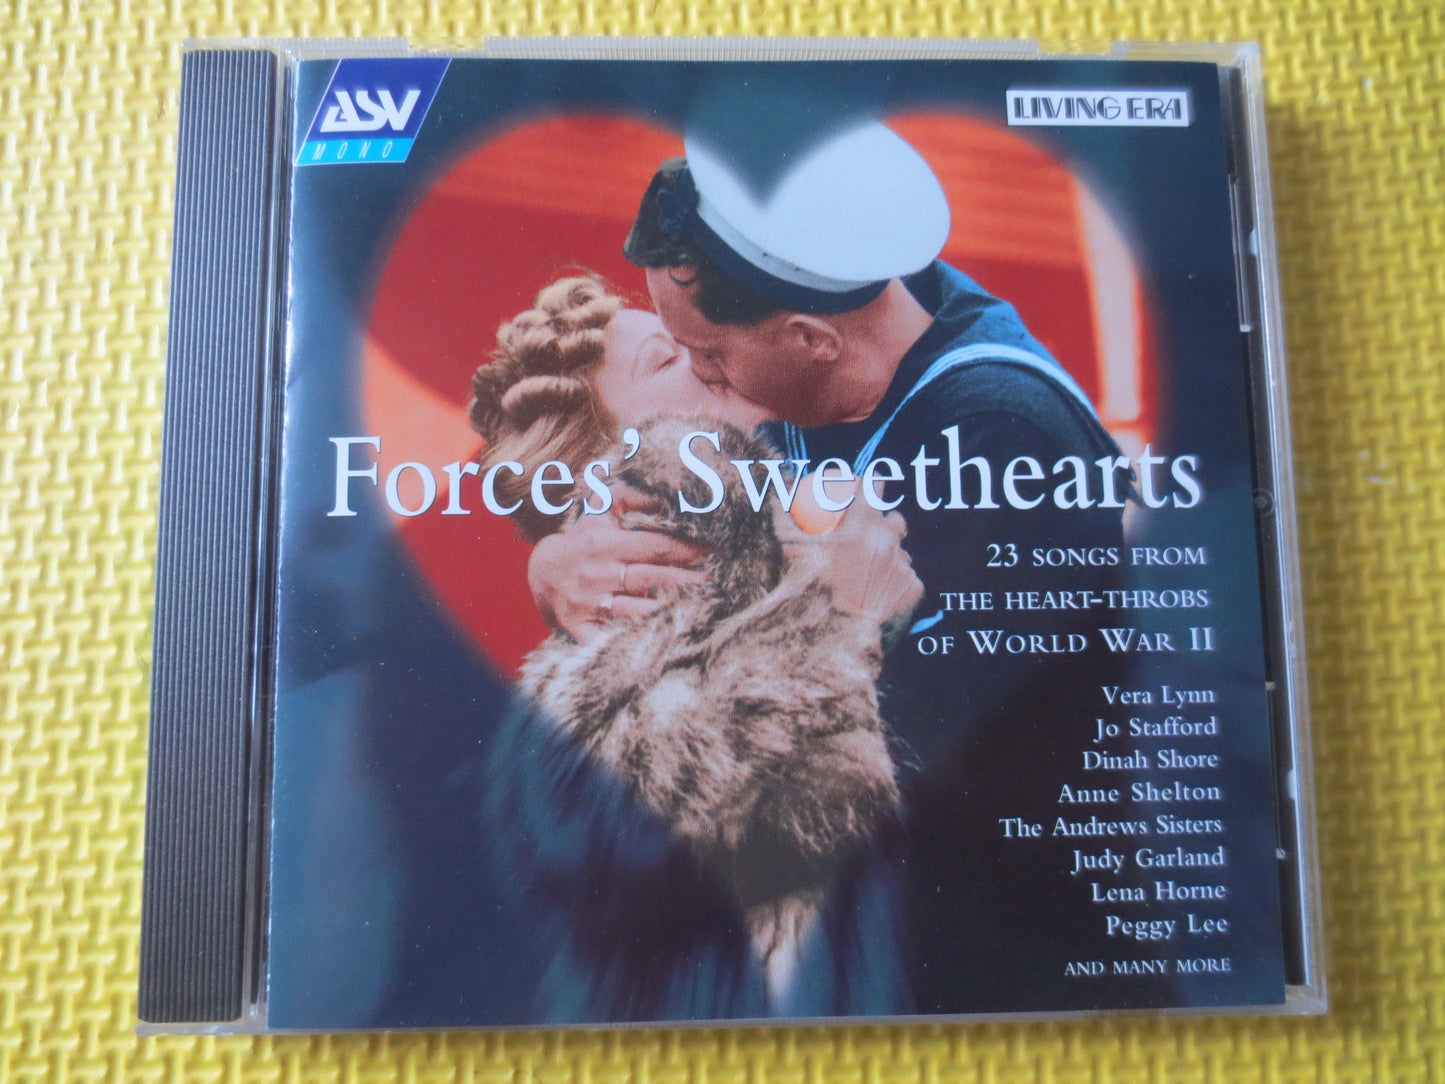 FORCES' SWEETHEARTS, Serious HITS, Vera Lynn Cd, Music Cds, Big Band Cds, Swing Music Cds, Swing Music Cd, 1999 Compact Discs